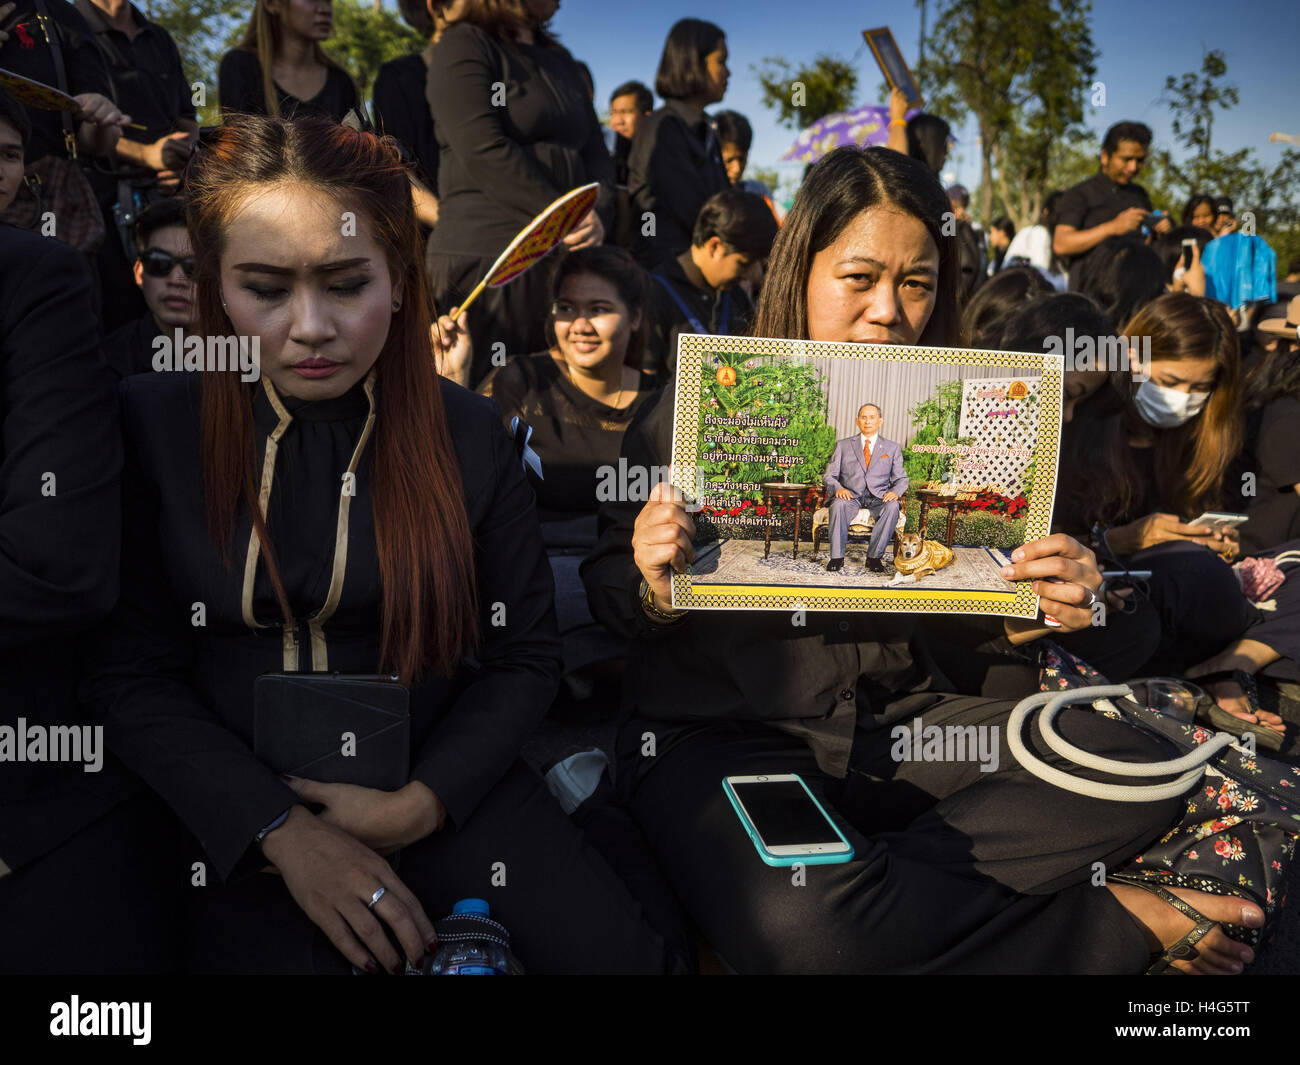 Bangkok, Bangkok, Thailand. 15th Oct, 2016. Women mourning the death of Bhumibol Adulyadej, the King of Thailand, sit on the sidewalk in front of the Grand Palace in Bangkok. King Bhumibol Adulyadej died Oct. 13, 2016. He was 88. His death comes after a period of failing health. With the king's death, the world's longest-reigning monarch is Queen Elizabeth II, who ascended to the British throne in 1952. Bhumibol Adulyadej, was born in Cambridge, MA, on 5 December 1927. He was the ninth monarch of Thailand from the Chakri Dynasty and is known as Rama IX. He became King on June 9, 1946 and s Stock Photo